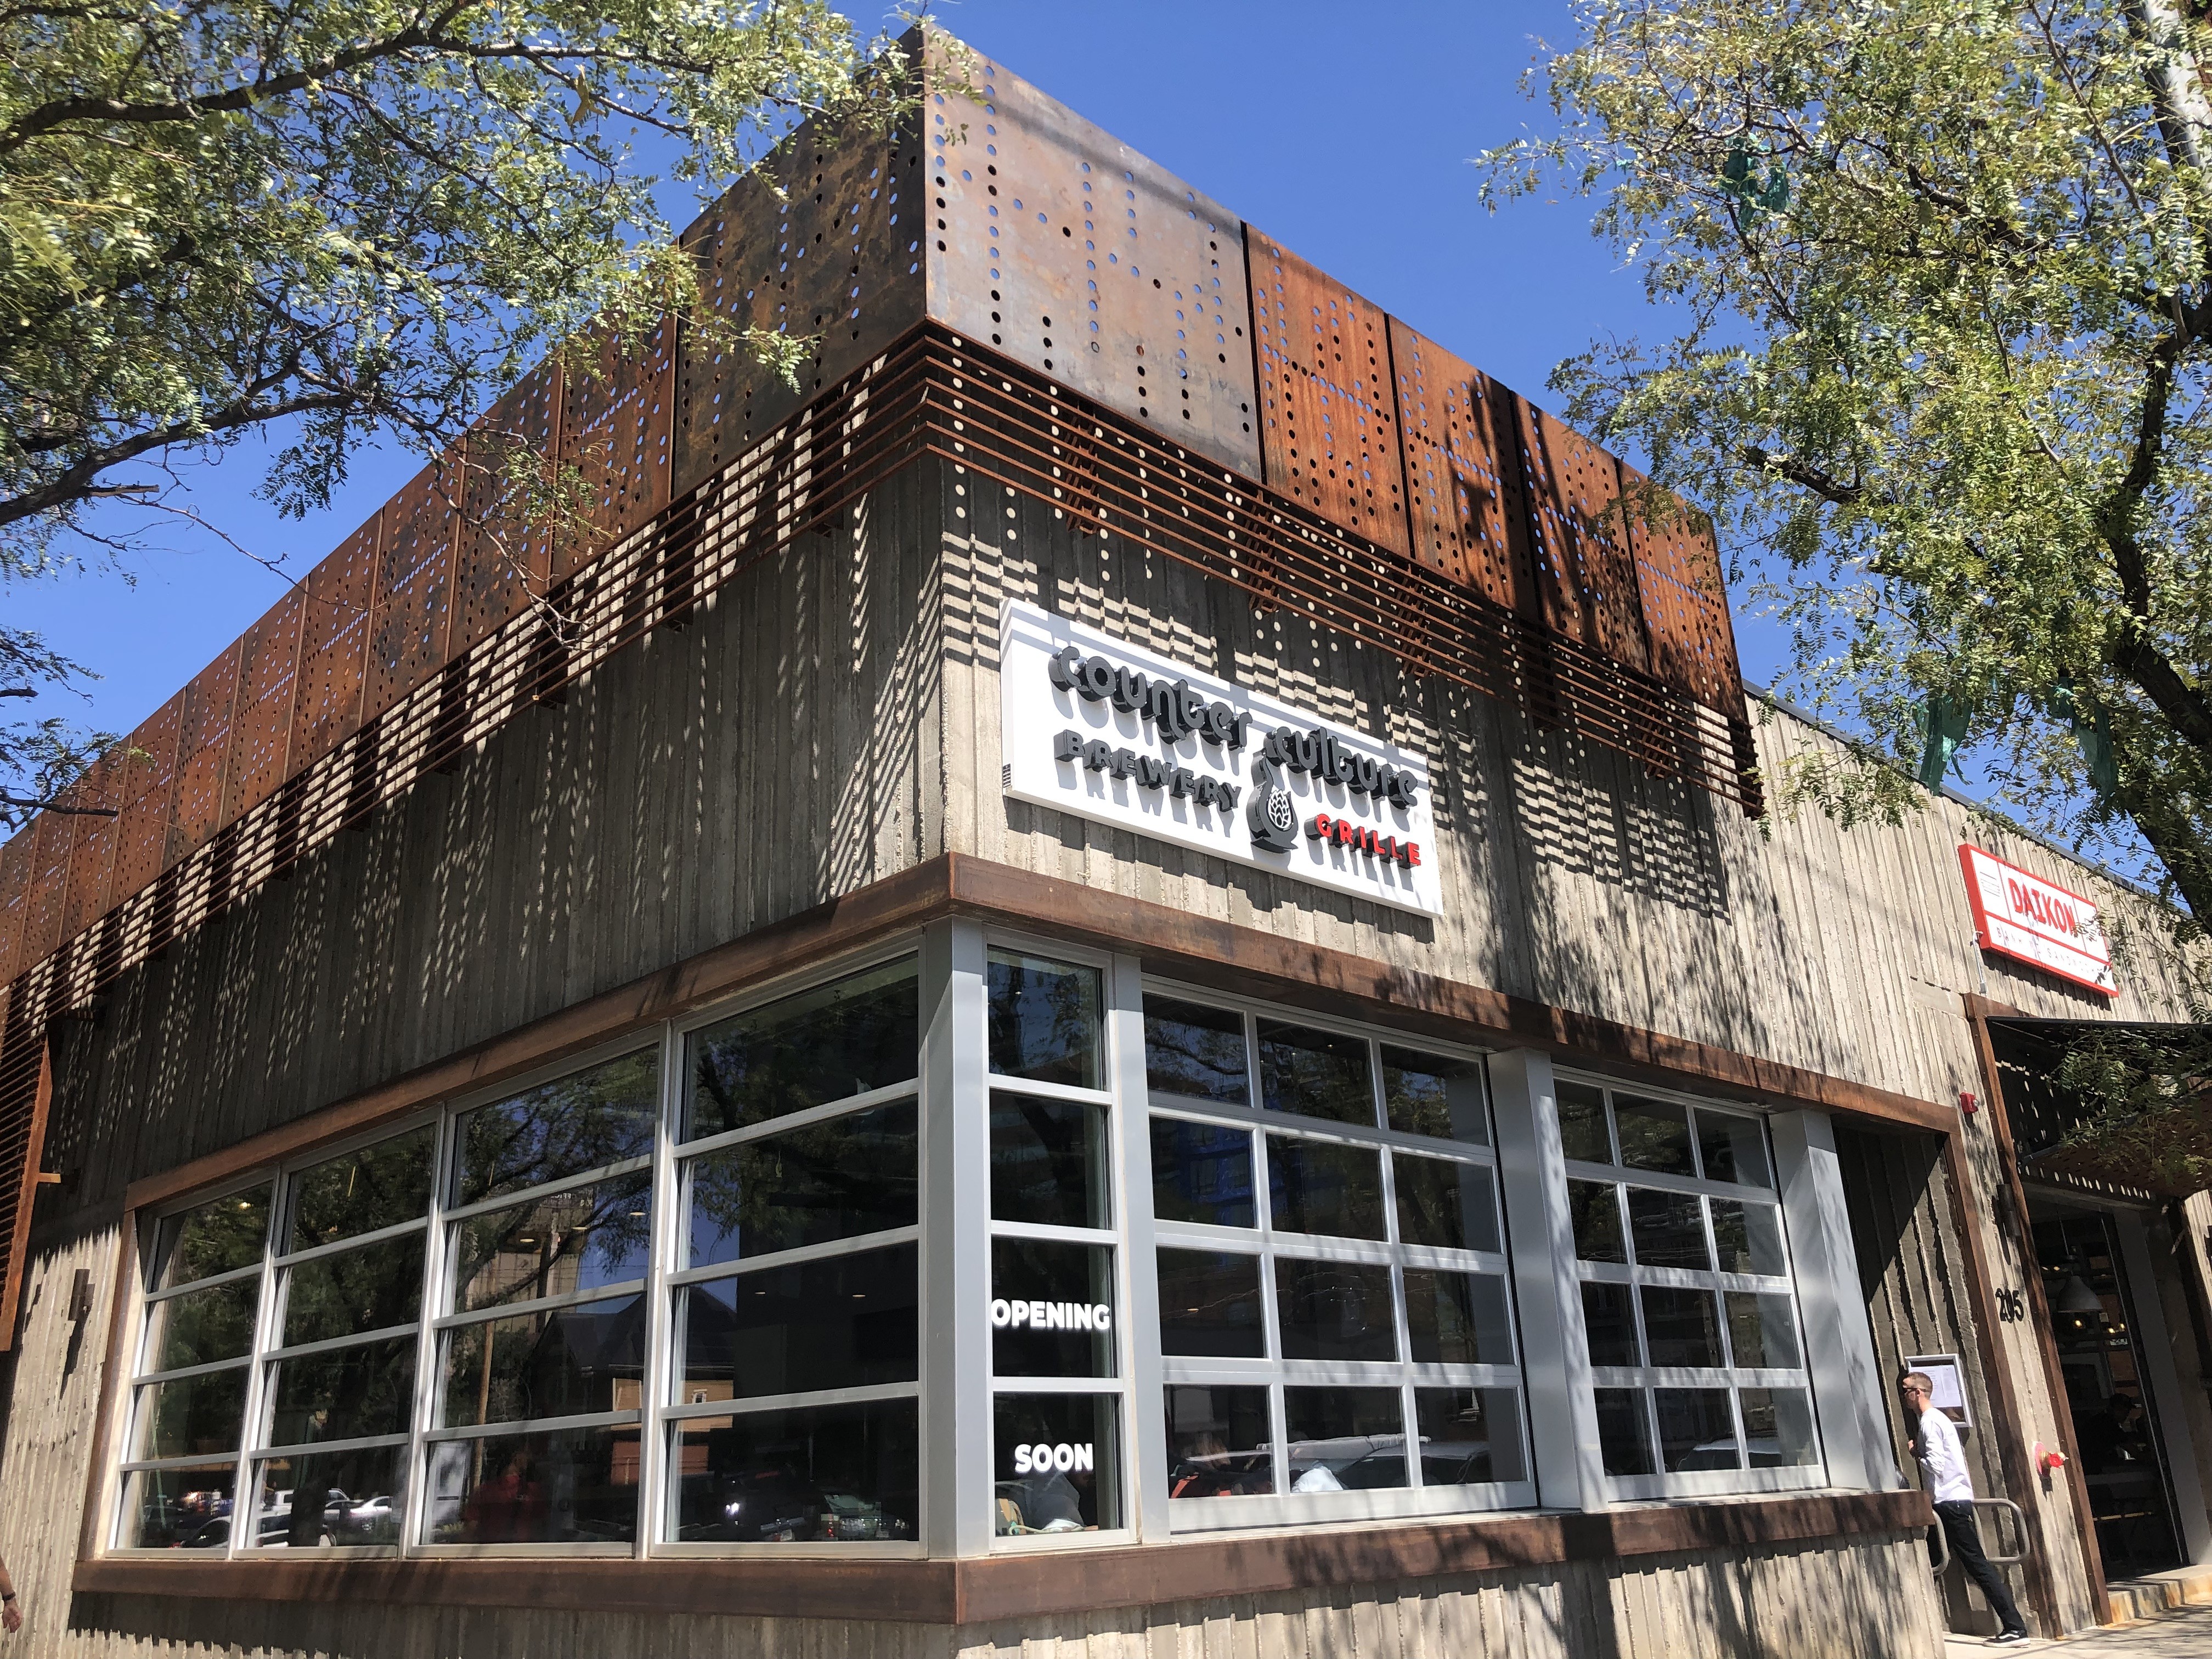 Counter Culture Brewing Will Open Taproom and Restaurant in Governor's Park